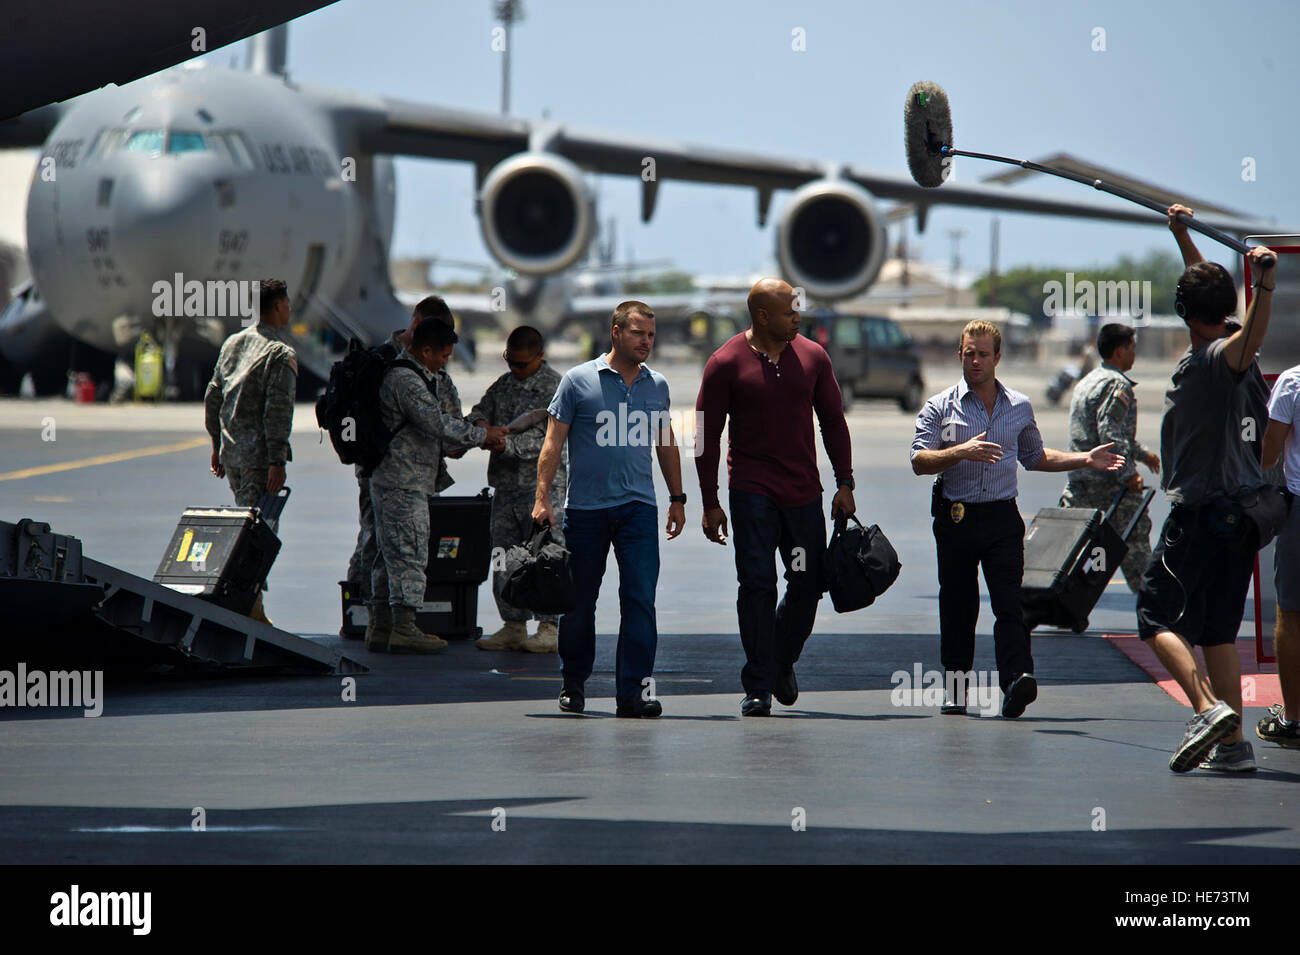 Actors Chris O'Donnell, LL Cool J, and Scott Caan of 'NCIS: Los Angeles' and 'Hawaii Five-0' act out a scene during a recent episode of the CBS hit show 'Hawaii Five-0' episode at Joint Base Pearl Harbor-Hickam on March 26, 2012. U.S. Air Force airmen and Hawaii Army National Guard soldiers were cast as  background extras during the filming. Stock Photo